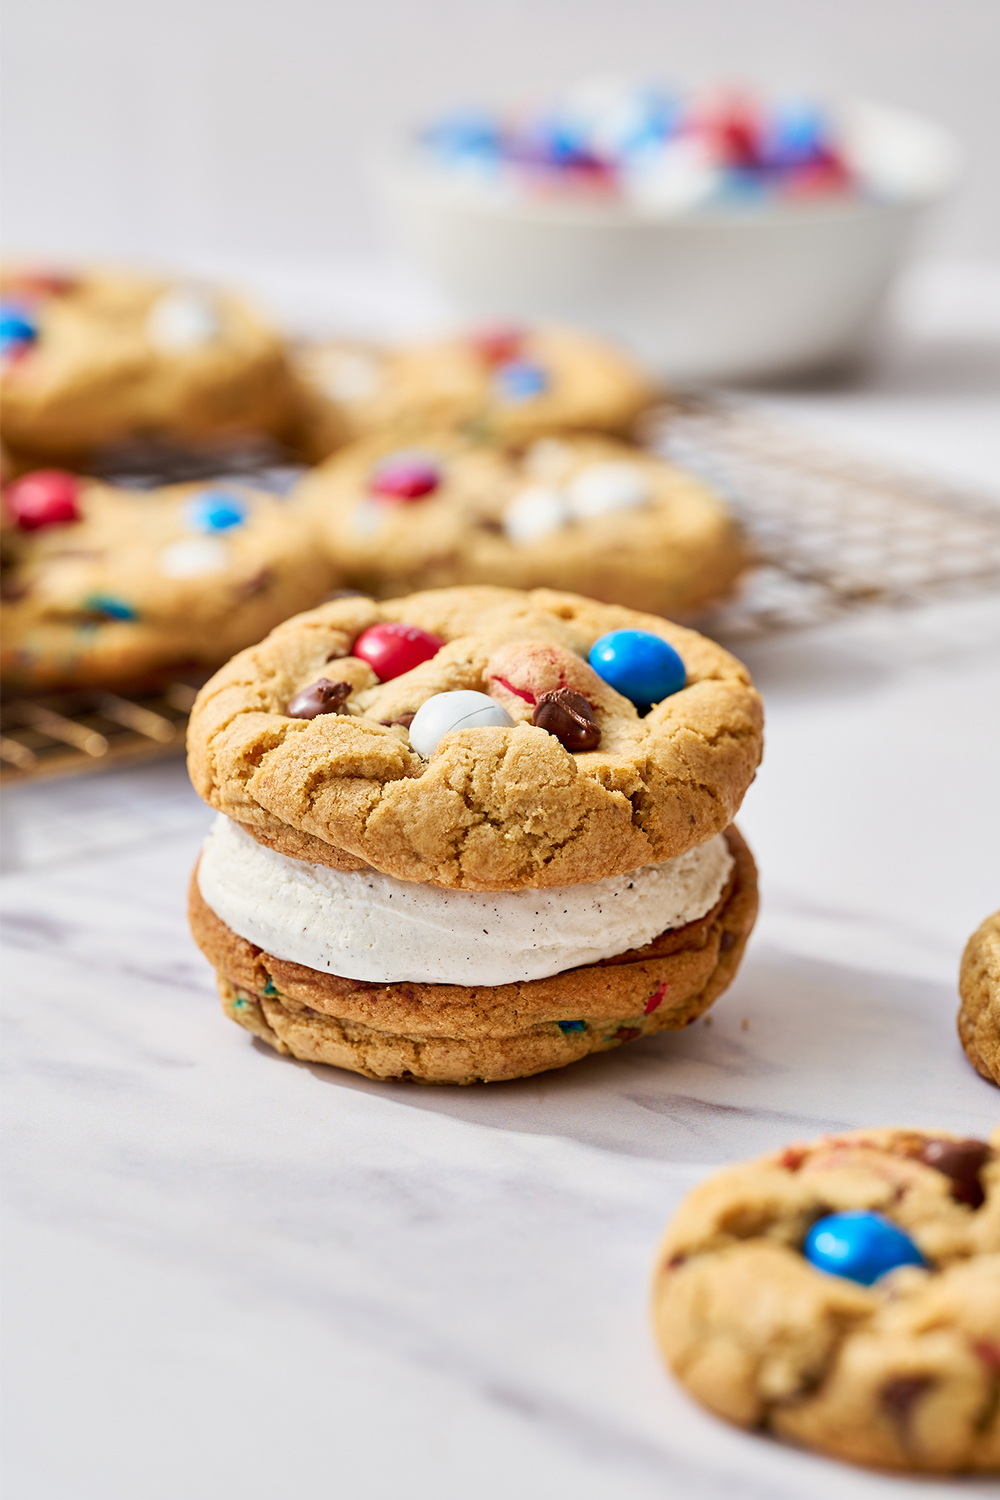 4th of July ice cream sandwich, sitting in front of a wire rack full of red, white, and blue M&M-studded chocolate chip cookies